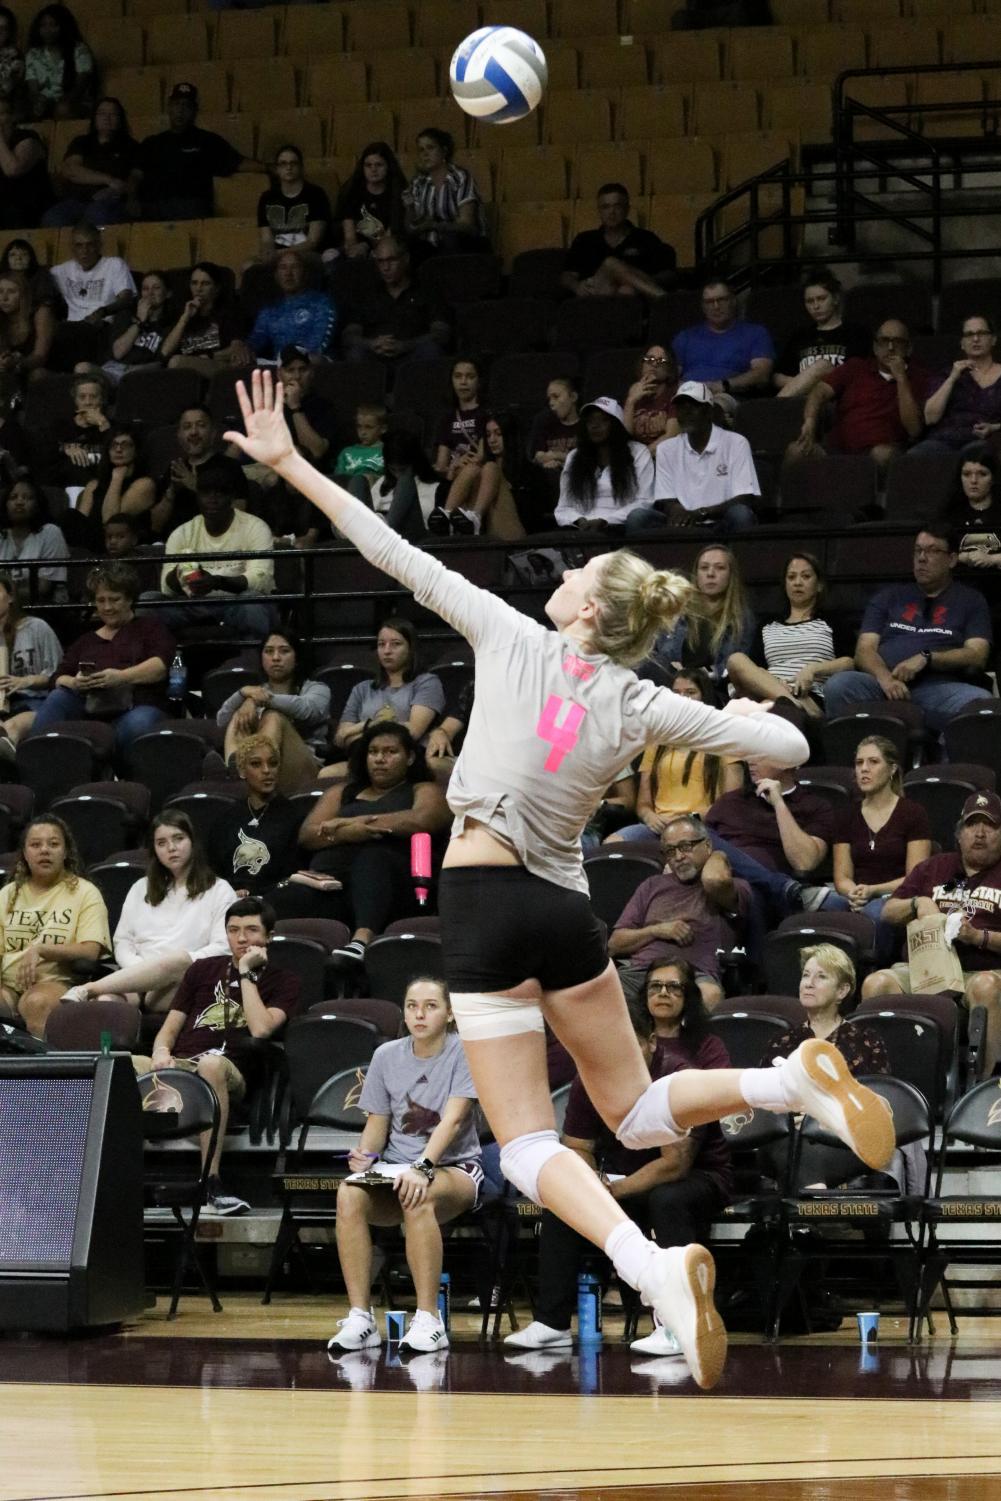 %28Photo+Gallery%29+Texas+State+volleyball+vs.+South+Alabama%2C+Oct.+19%2C+2019